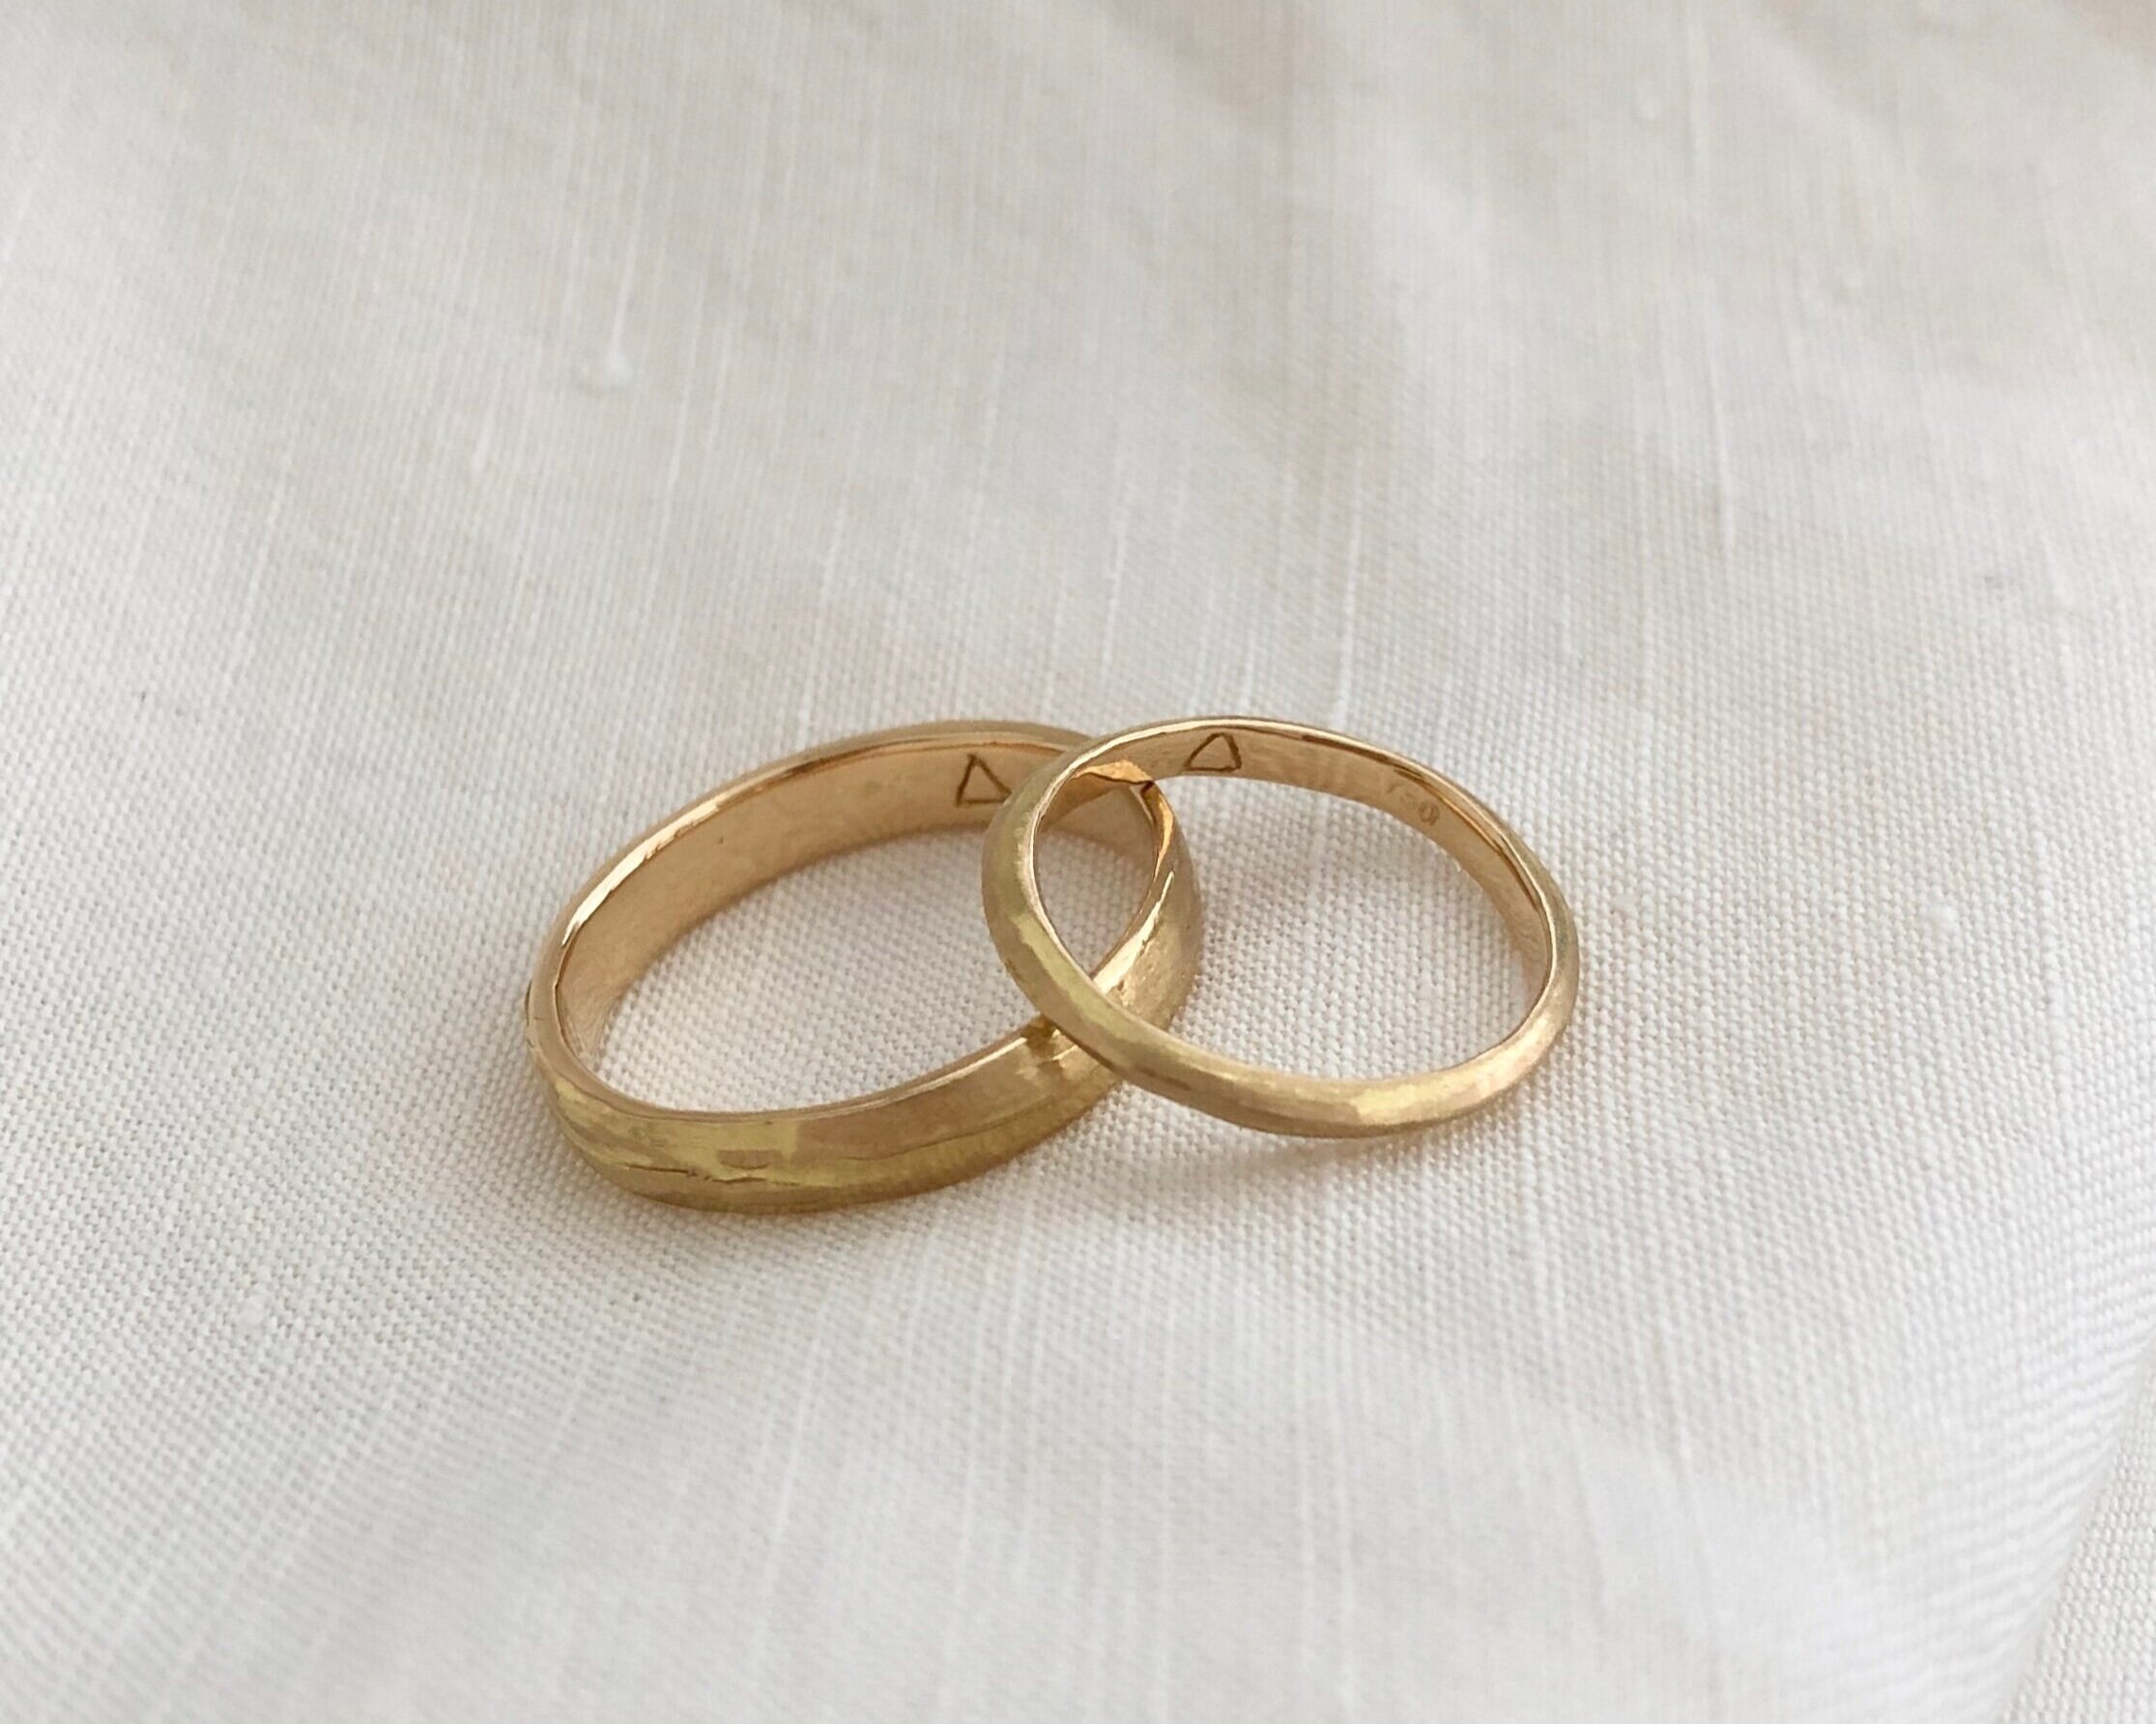  18k yellow gold textured wedding bands with engraving 